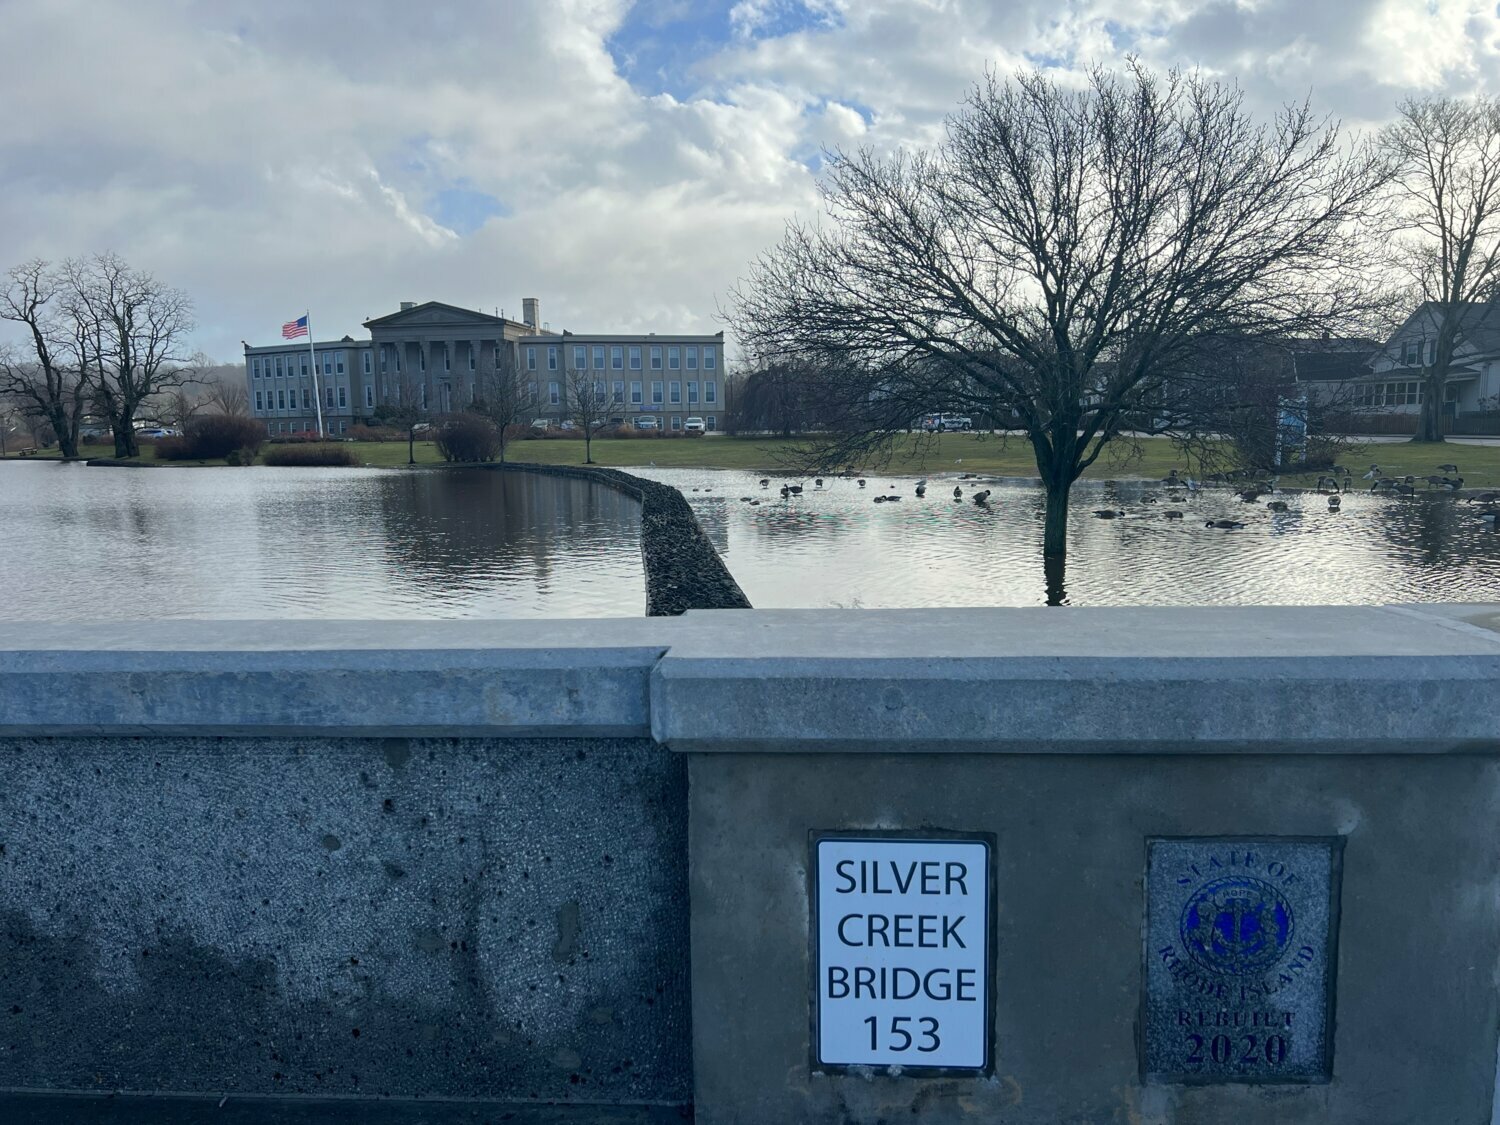 Silver Creek has flooded multiple times in recent months. A grant to help plant more trees along crucial watersheds hopes to mitigate some of that reality.